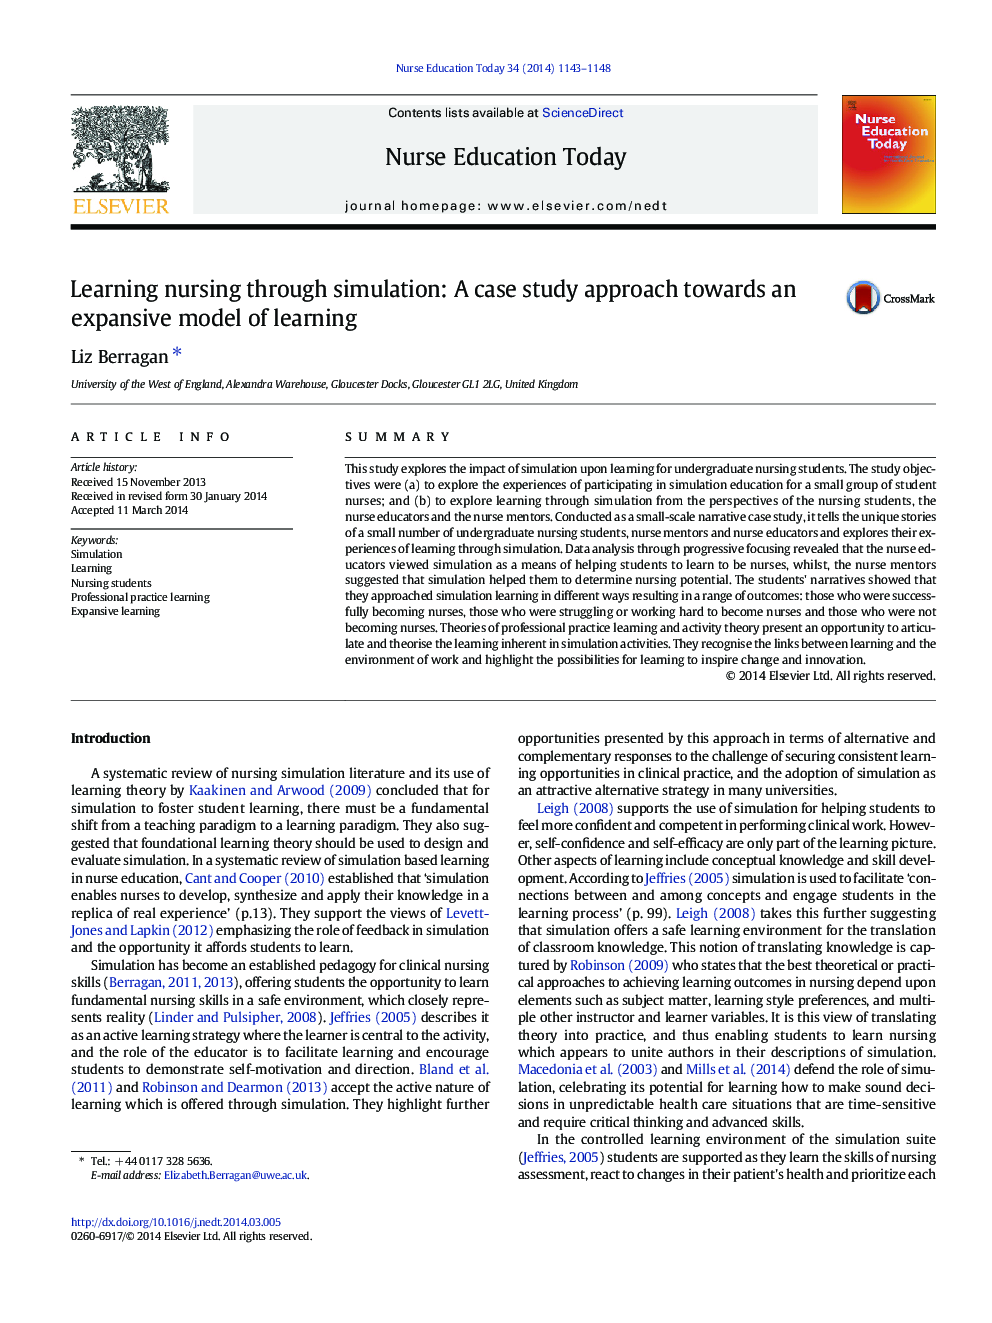 Learning nursing through simulation: A case study approach towards an expansive model of learning